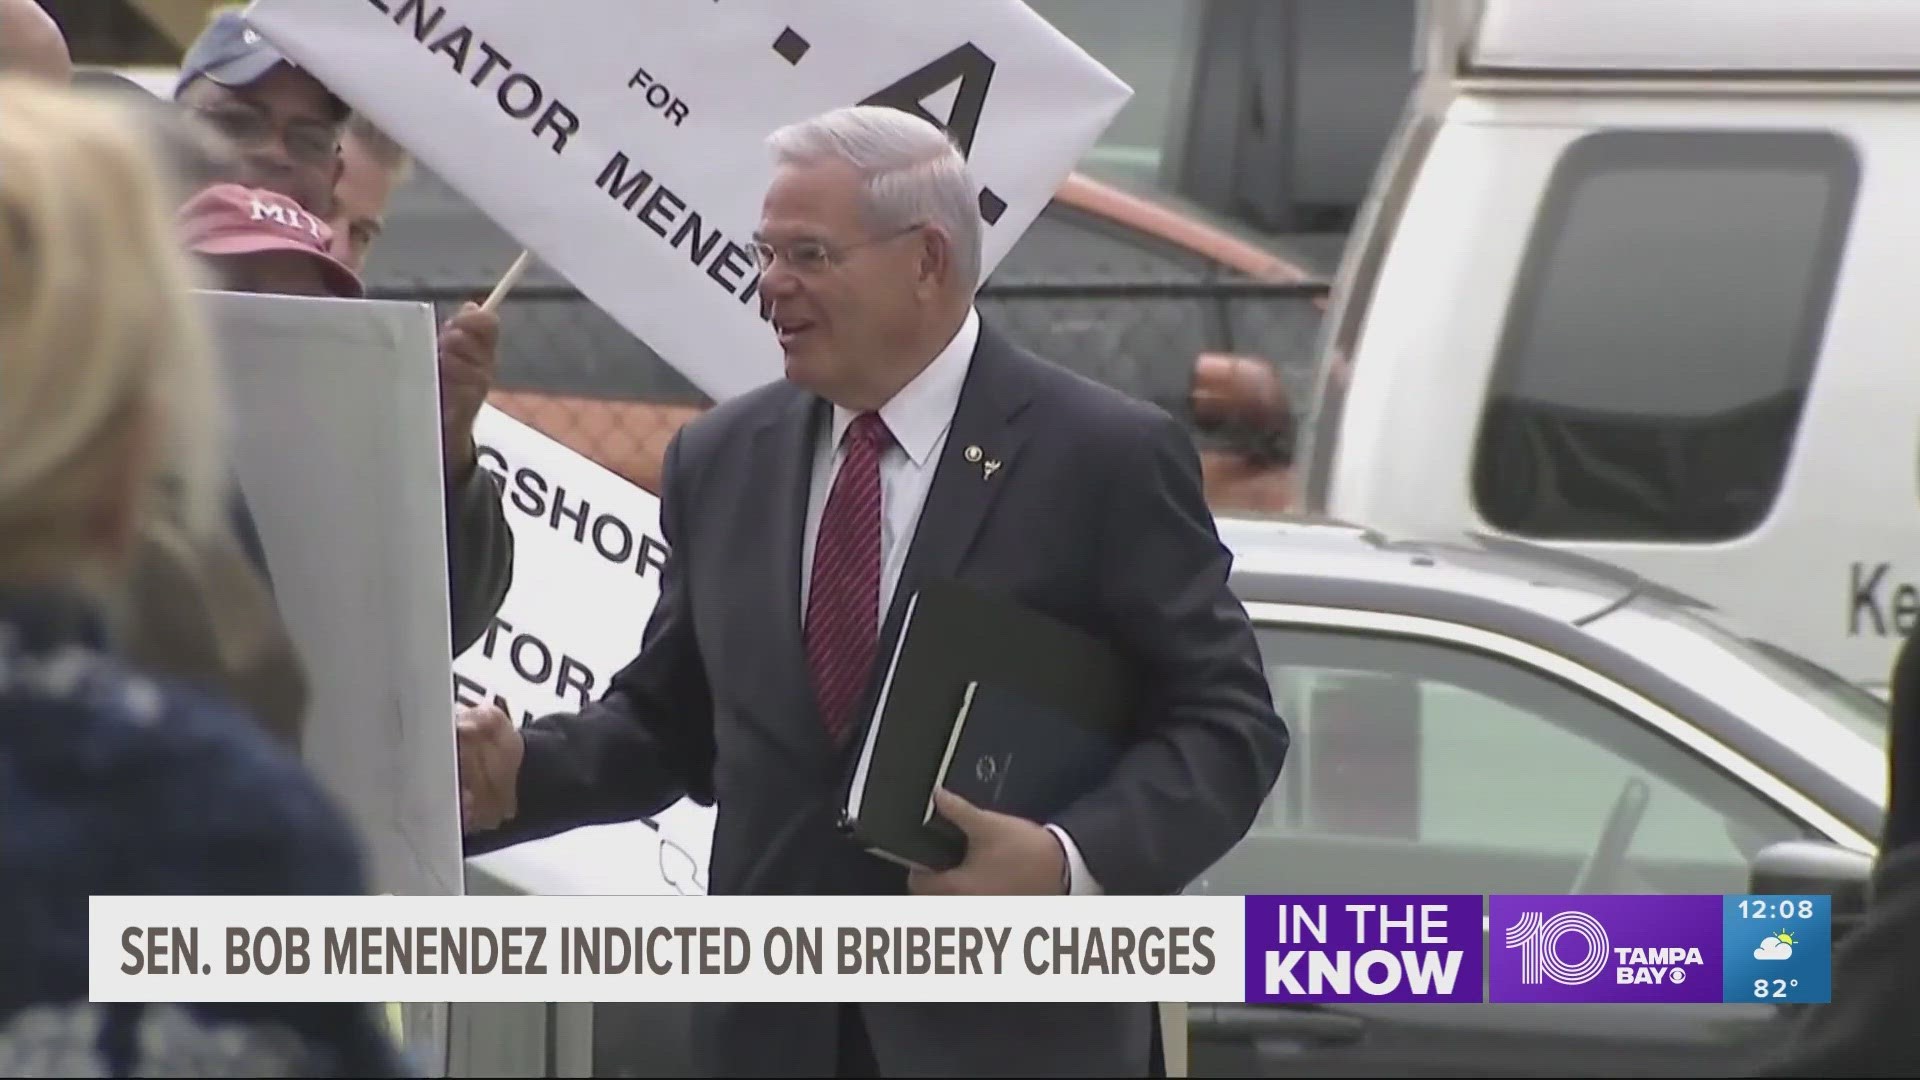 U.S. Sen. Bob Menendez of New Jersey and his wife were indicted Friday on charges that they took bribes of cash.